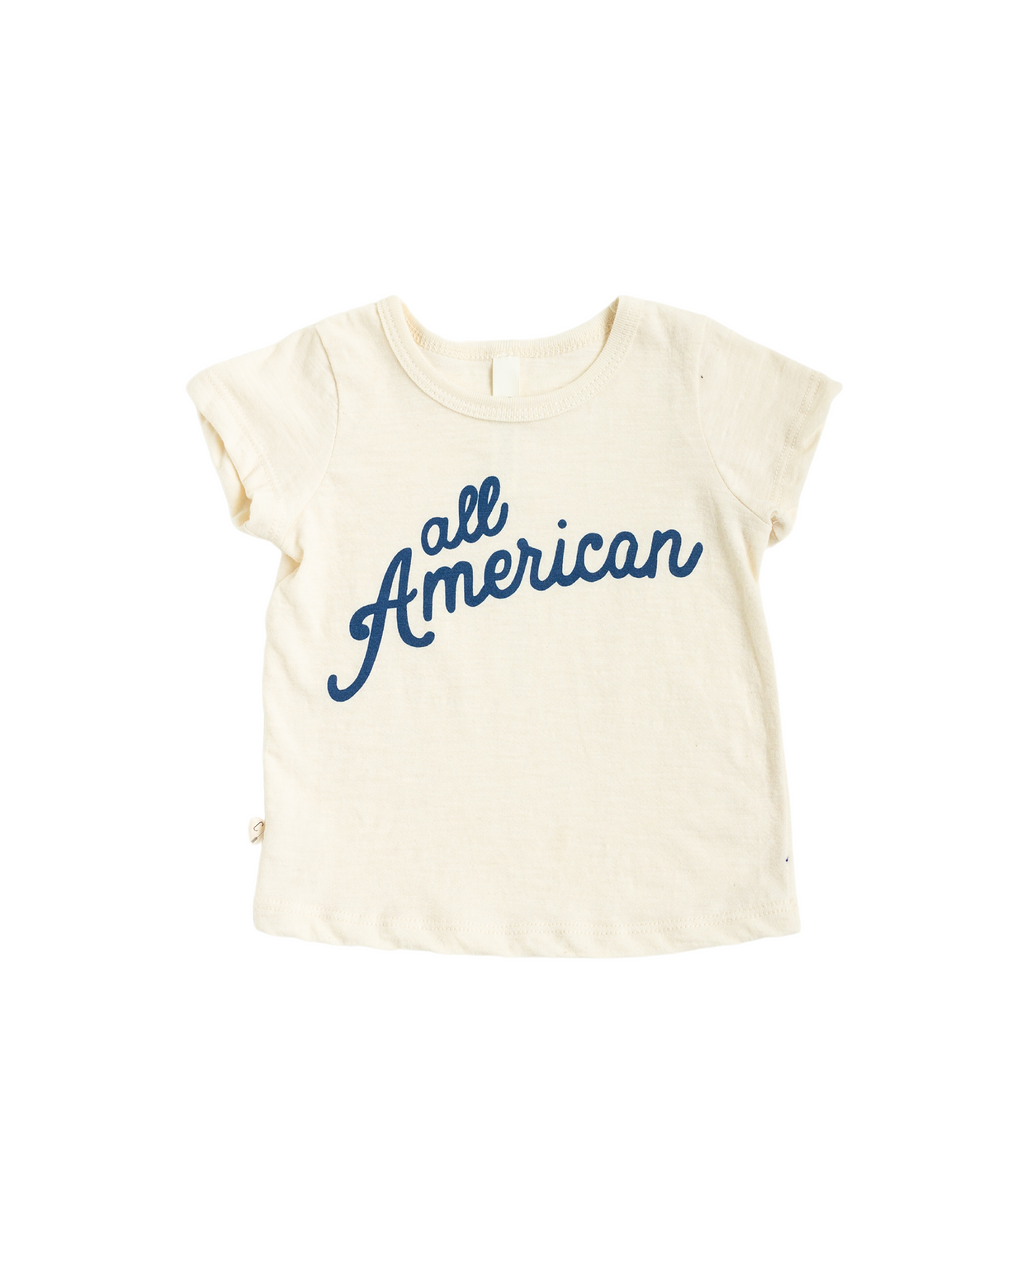 basic tee - all american on natural